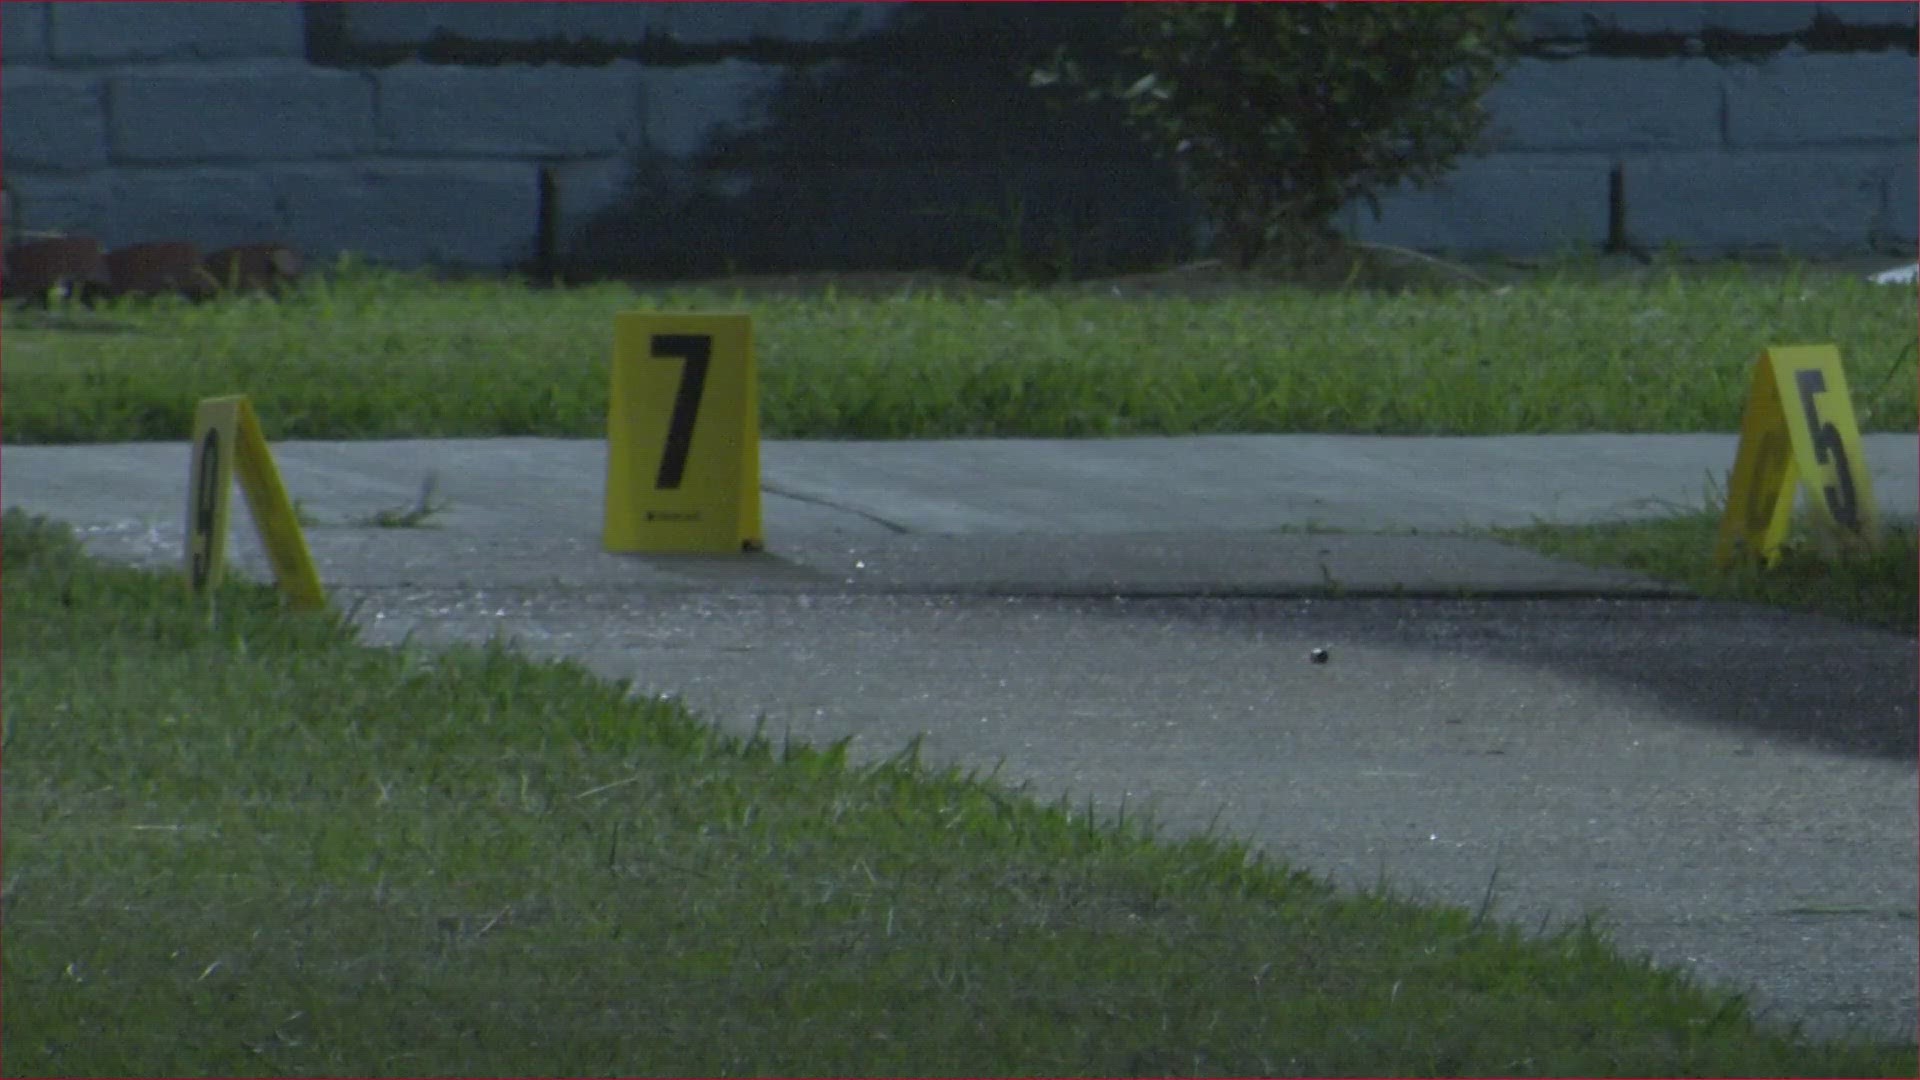 A teen boy died after being shot at an apartment complex in east Harris County Friday morning, according to Sheriff Ed Gonzalez.